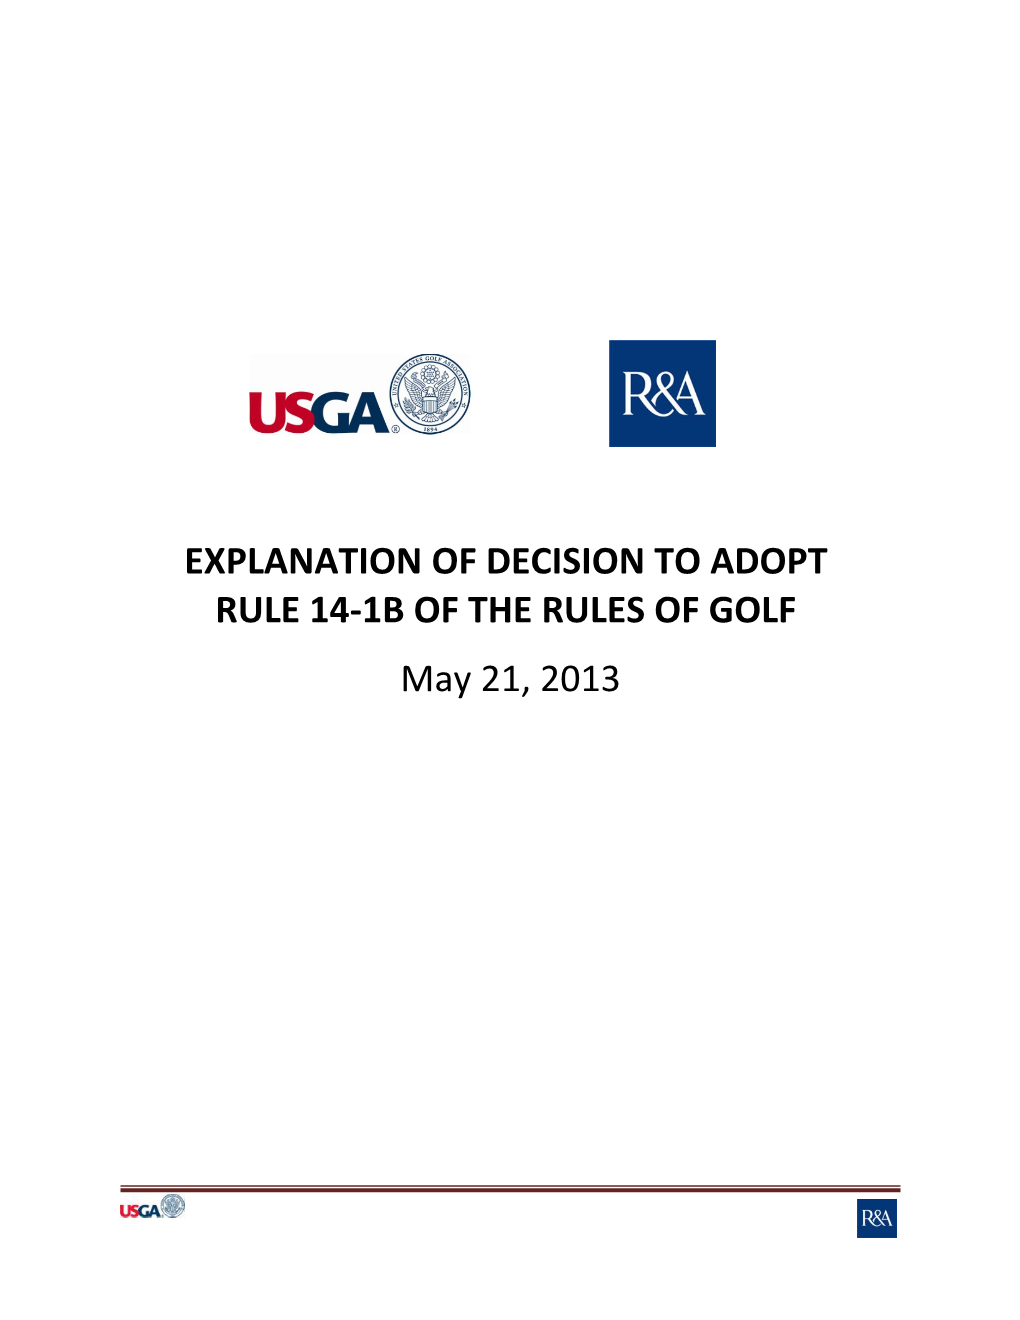 Explanation of Decision to Adopt Rule 14-1B of the Rules of Golf